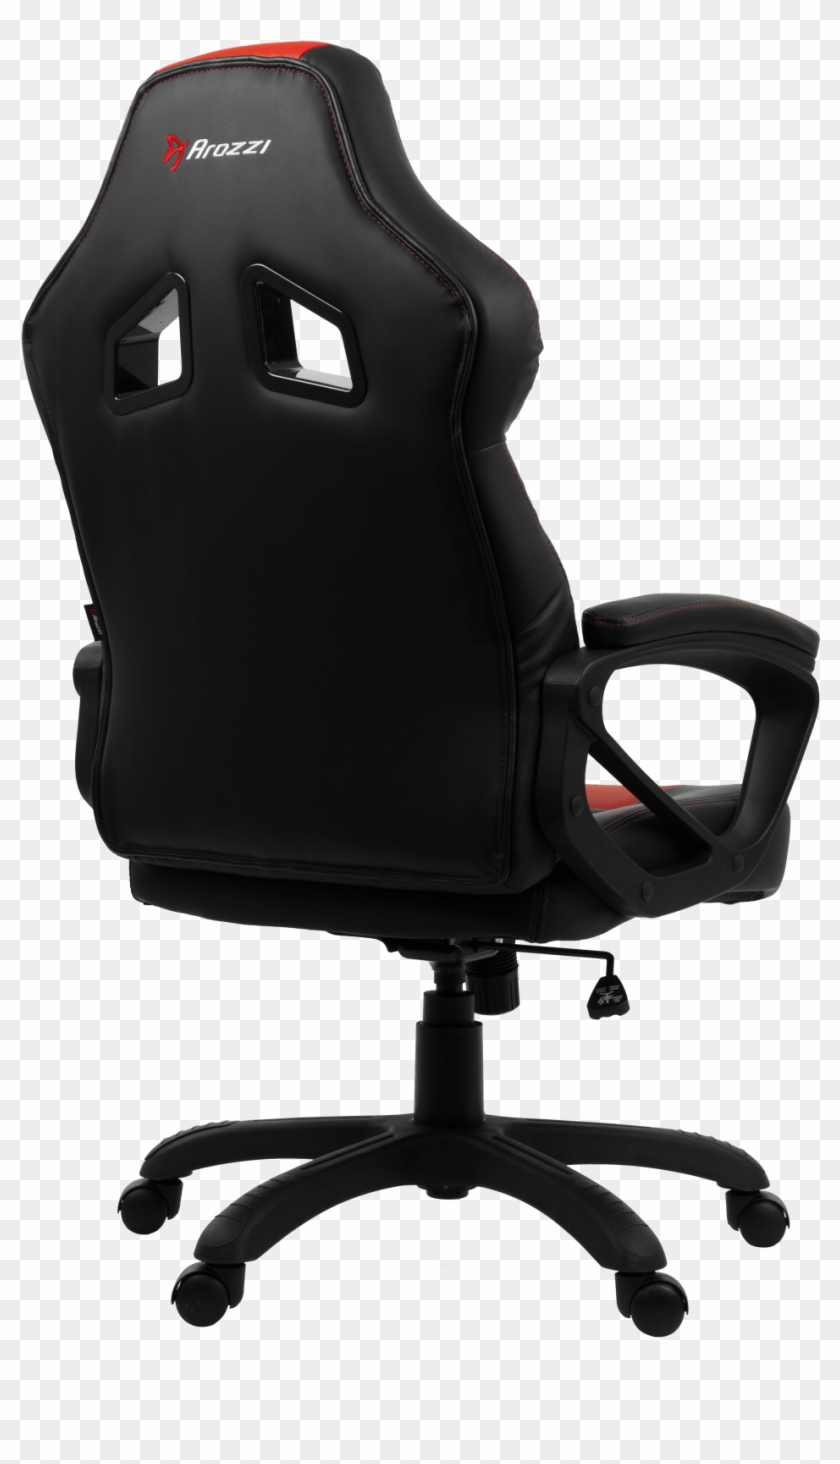 Monza Red Arozzi Monza Gaming Chair Assembly Hd Png Download 1150x2048 5473013 Pngfind